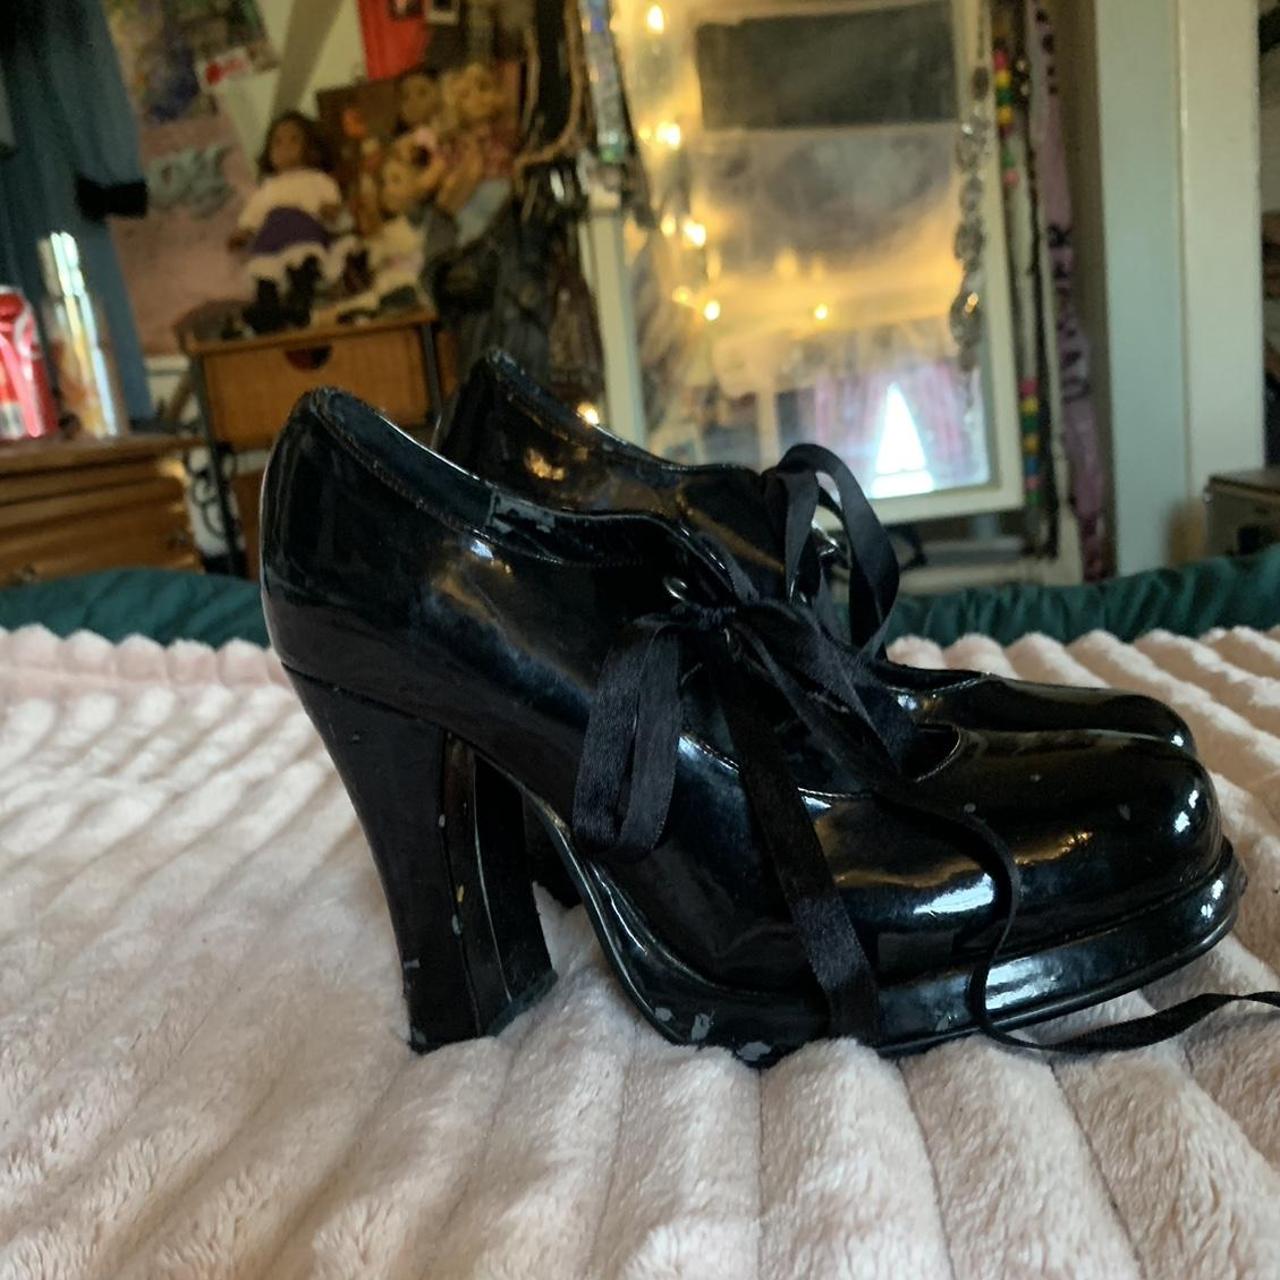 Hot Topic Women's Black Courts (5)